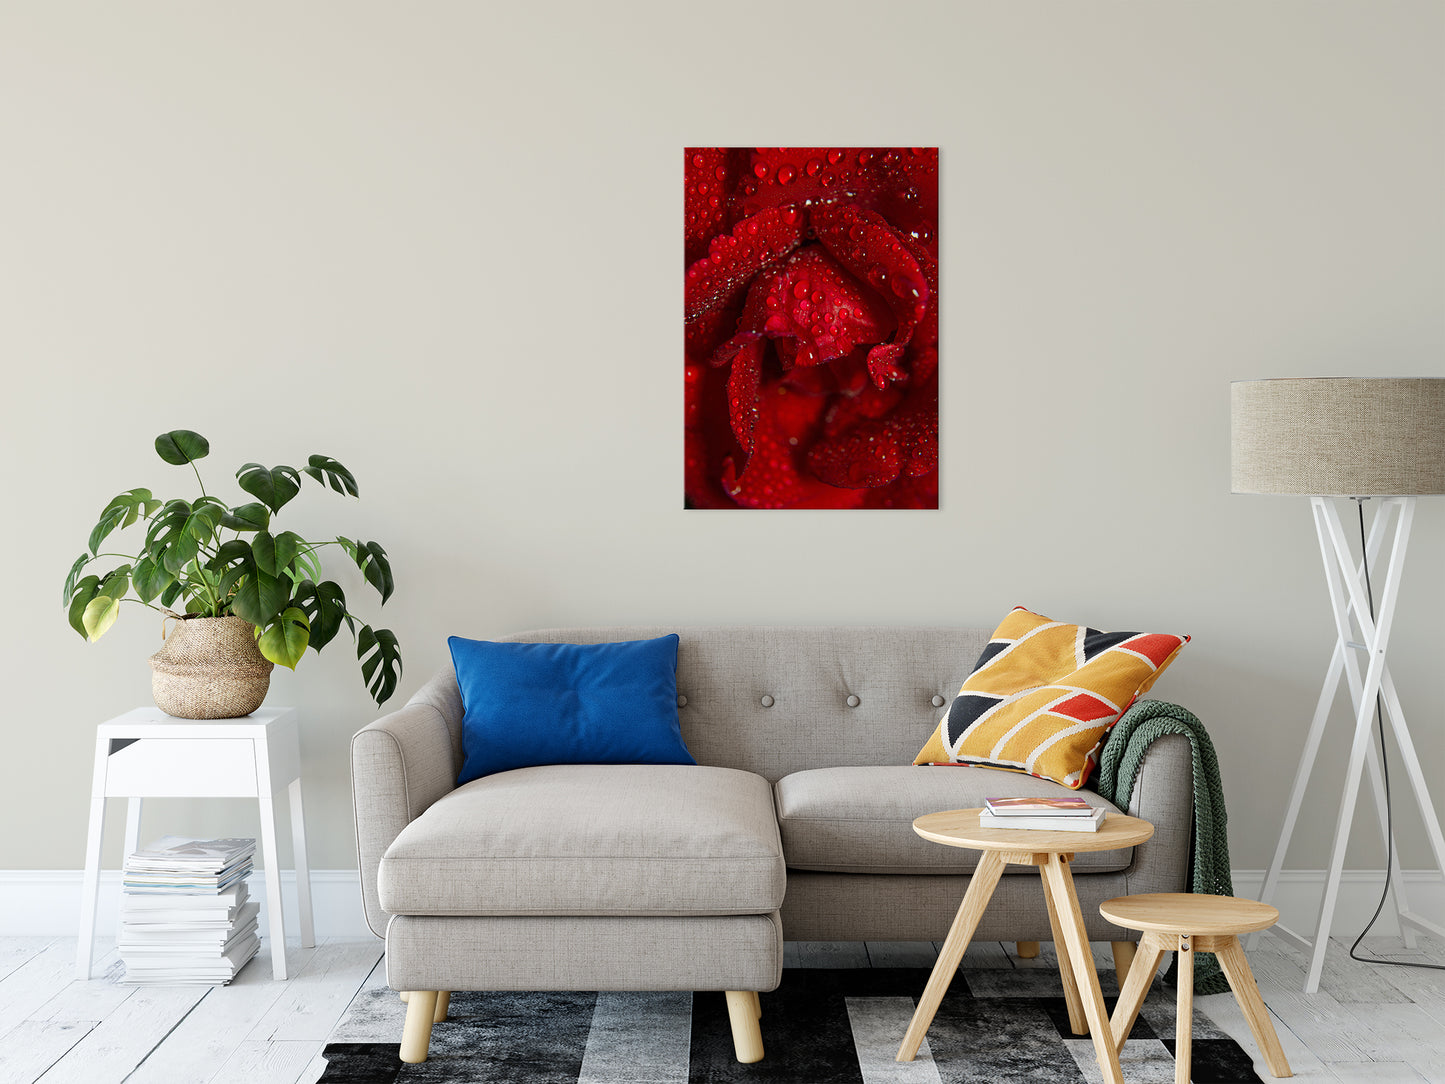 Royal Red Rose Nature / Floral Photo Fine Art Canvas Wall Art Prints 24" x 36" - PIPAFINEART